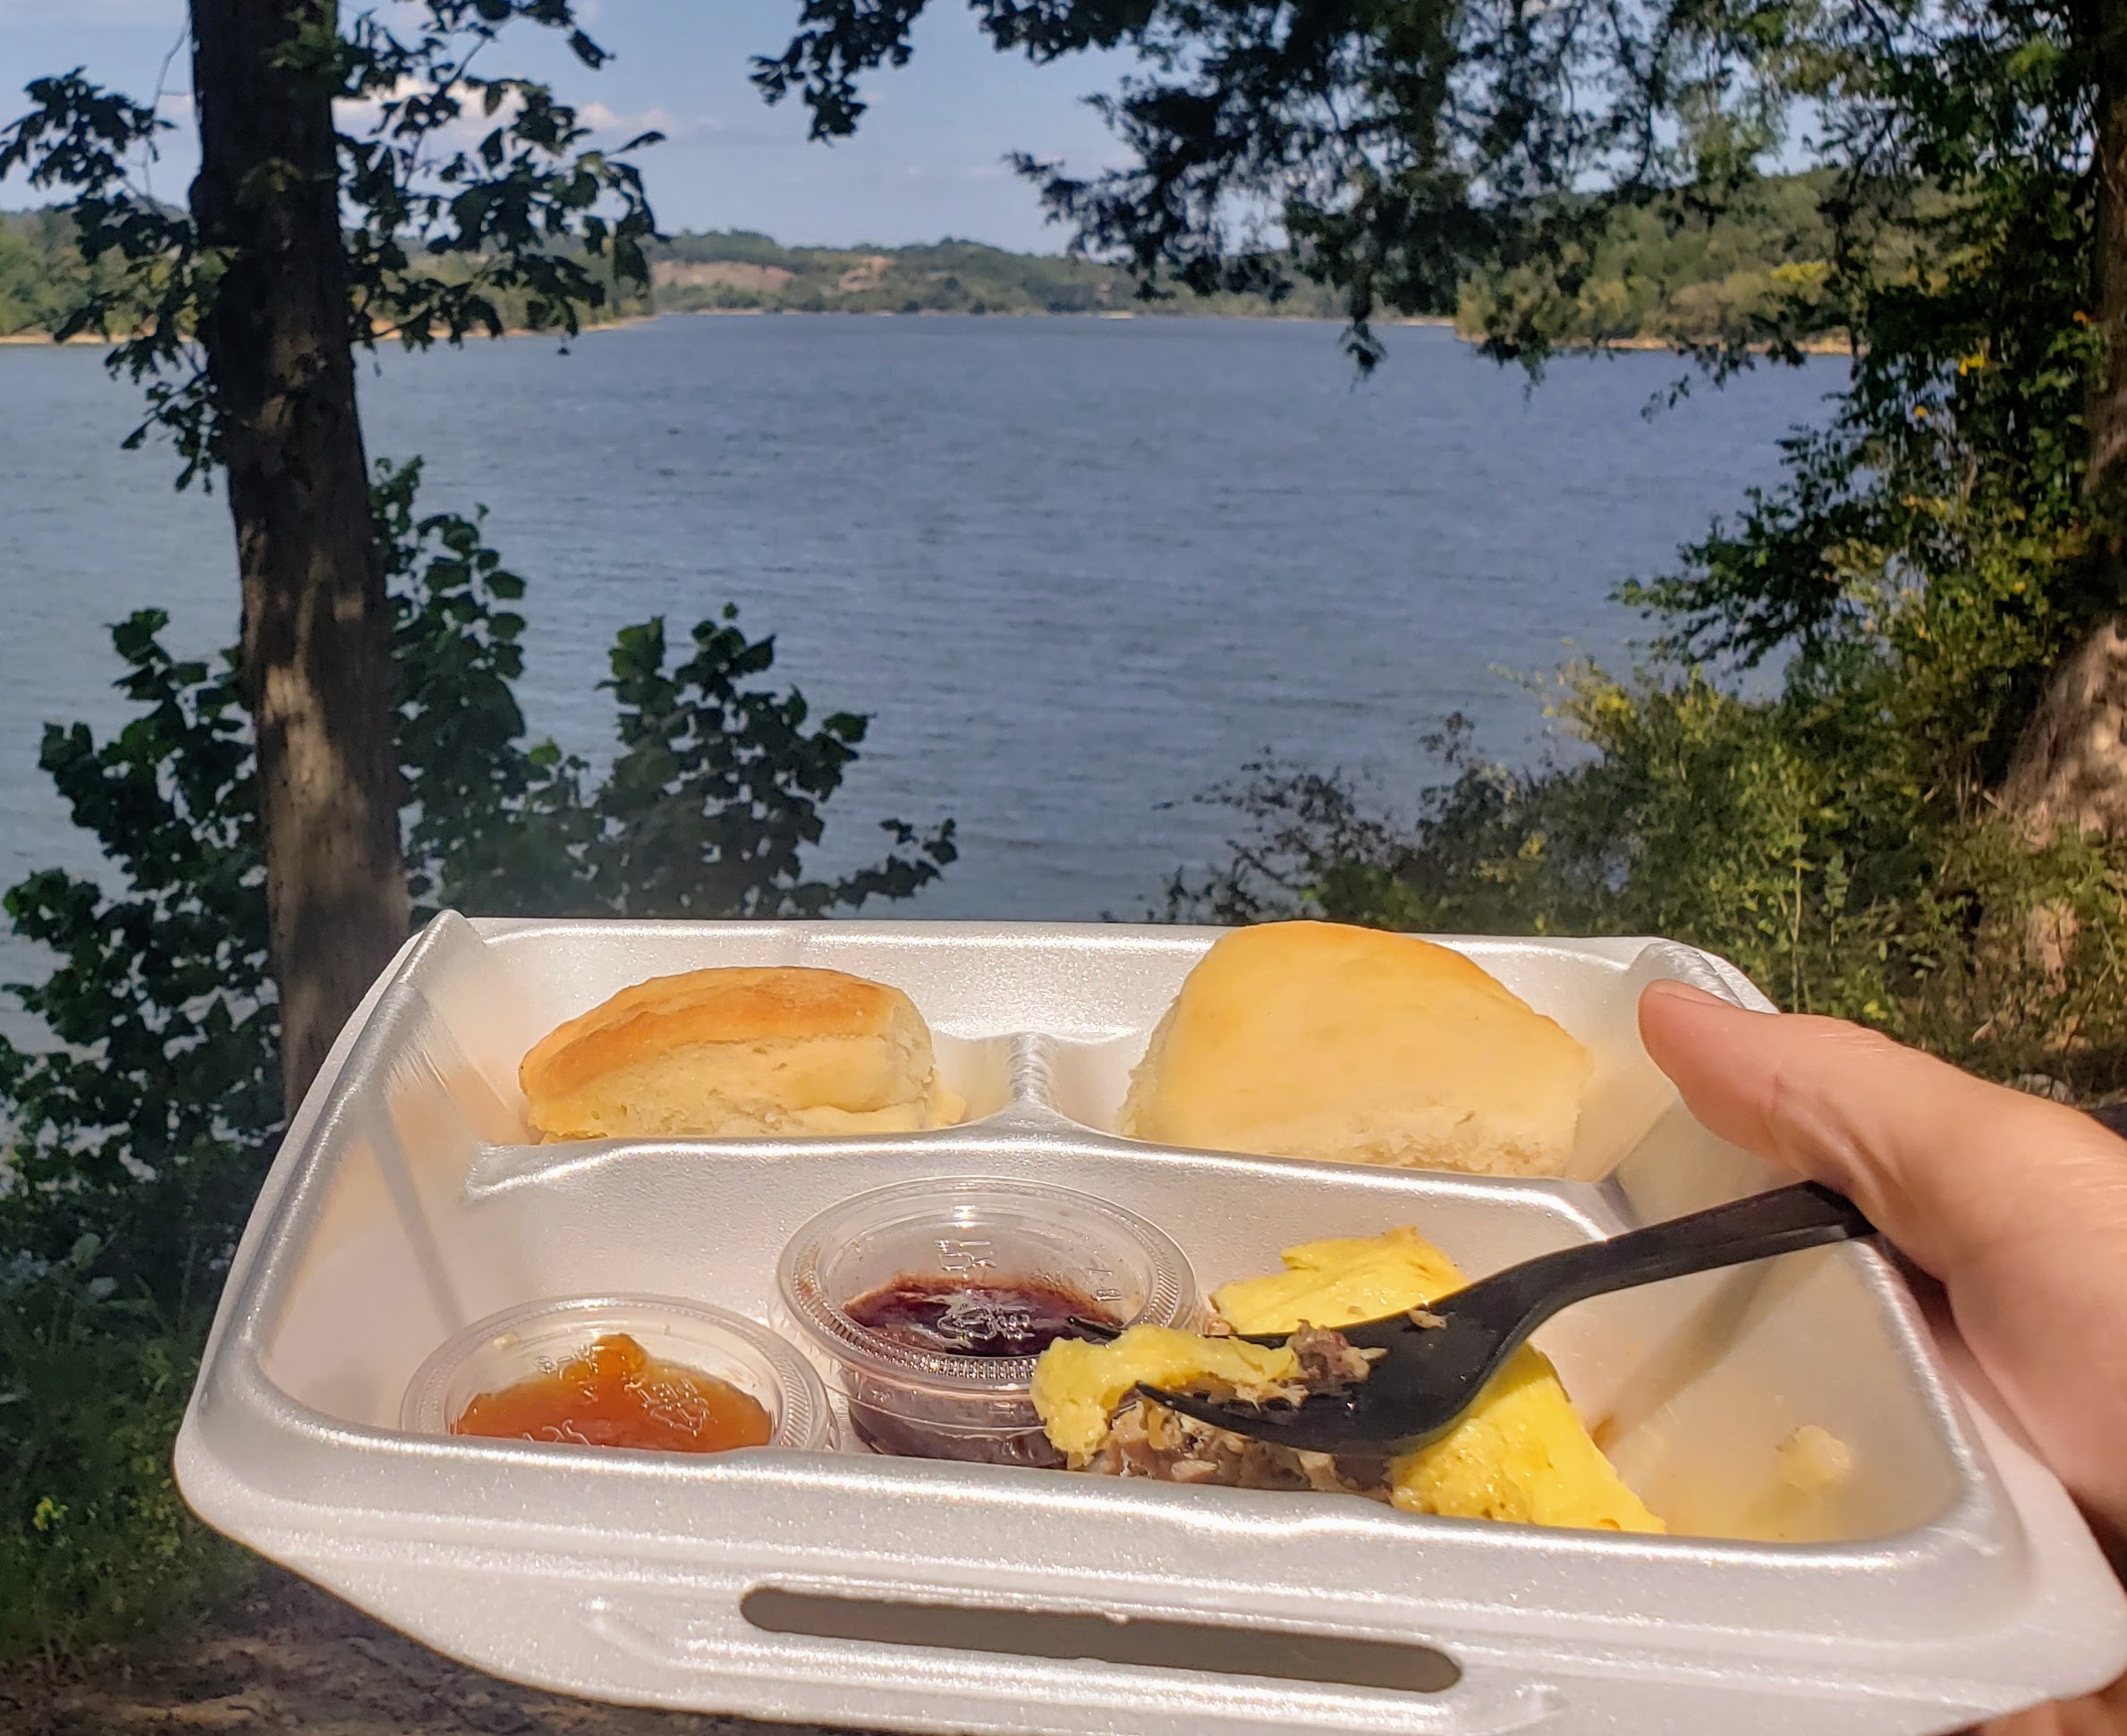 Lunch along the Tennessee river.